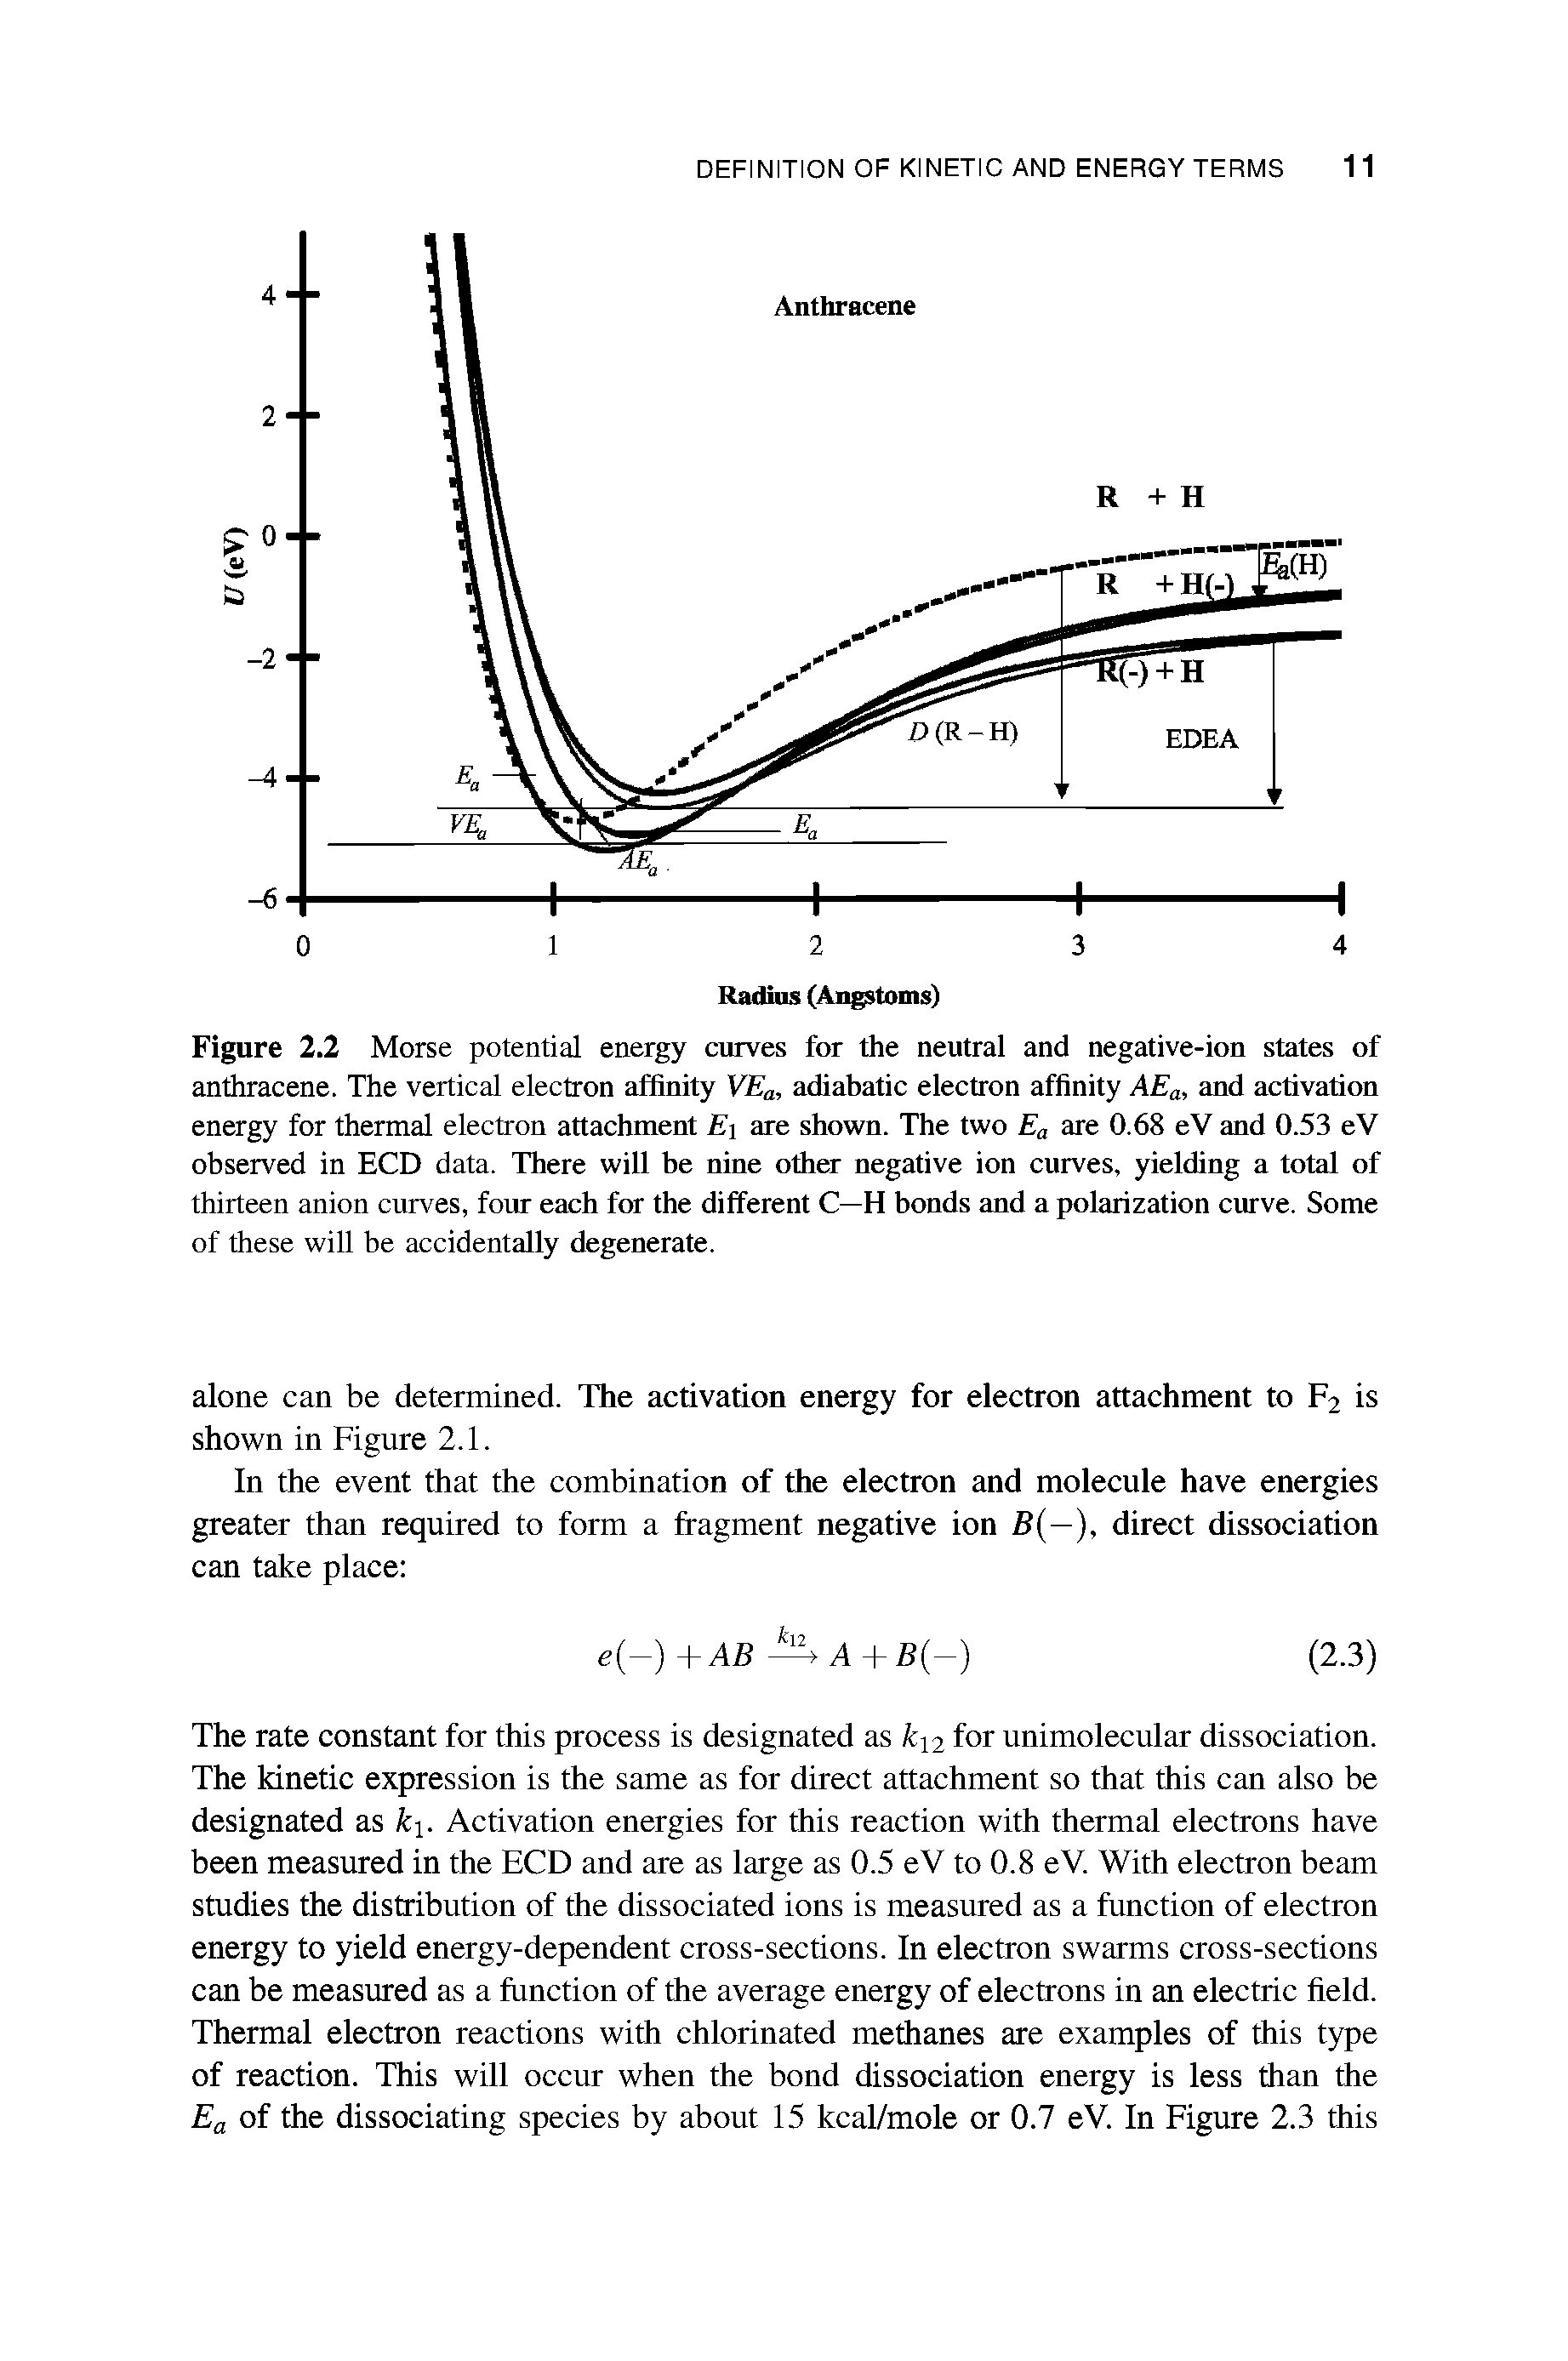 Figure 2.2 Morse potential energy curves for the neutral and negative-ion states of anthracene. The vertical electron affinity VEa, adiabatic electron affinity AEa, and activation energy for thermal electron attachment E are shown. The two Ea are 0.68 eV and 0.53 eV observed in ECD data. There will be nine other negative ion curves, yielding a total of thirteen anion curves, four each for the different C—H bonds and a polarization curve. Some of these will be accidentally degenerate.